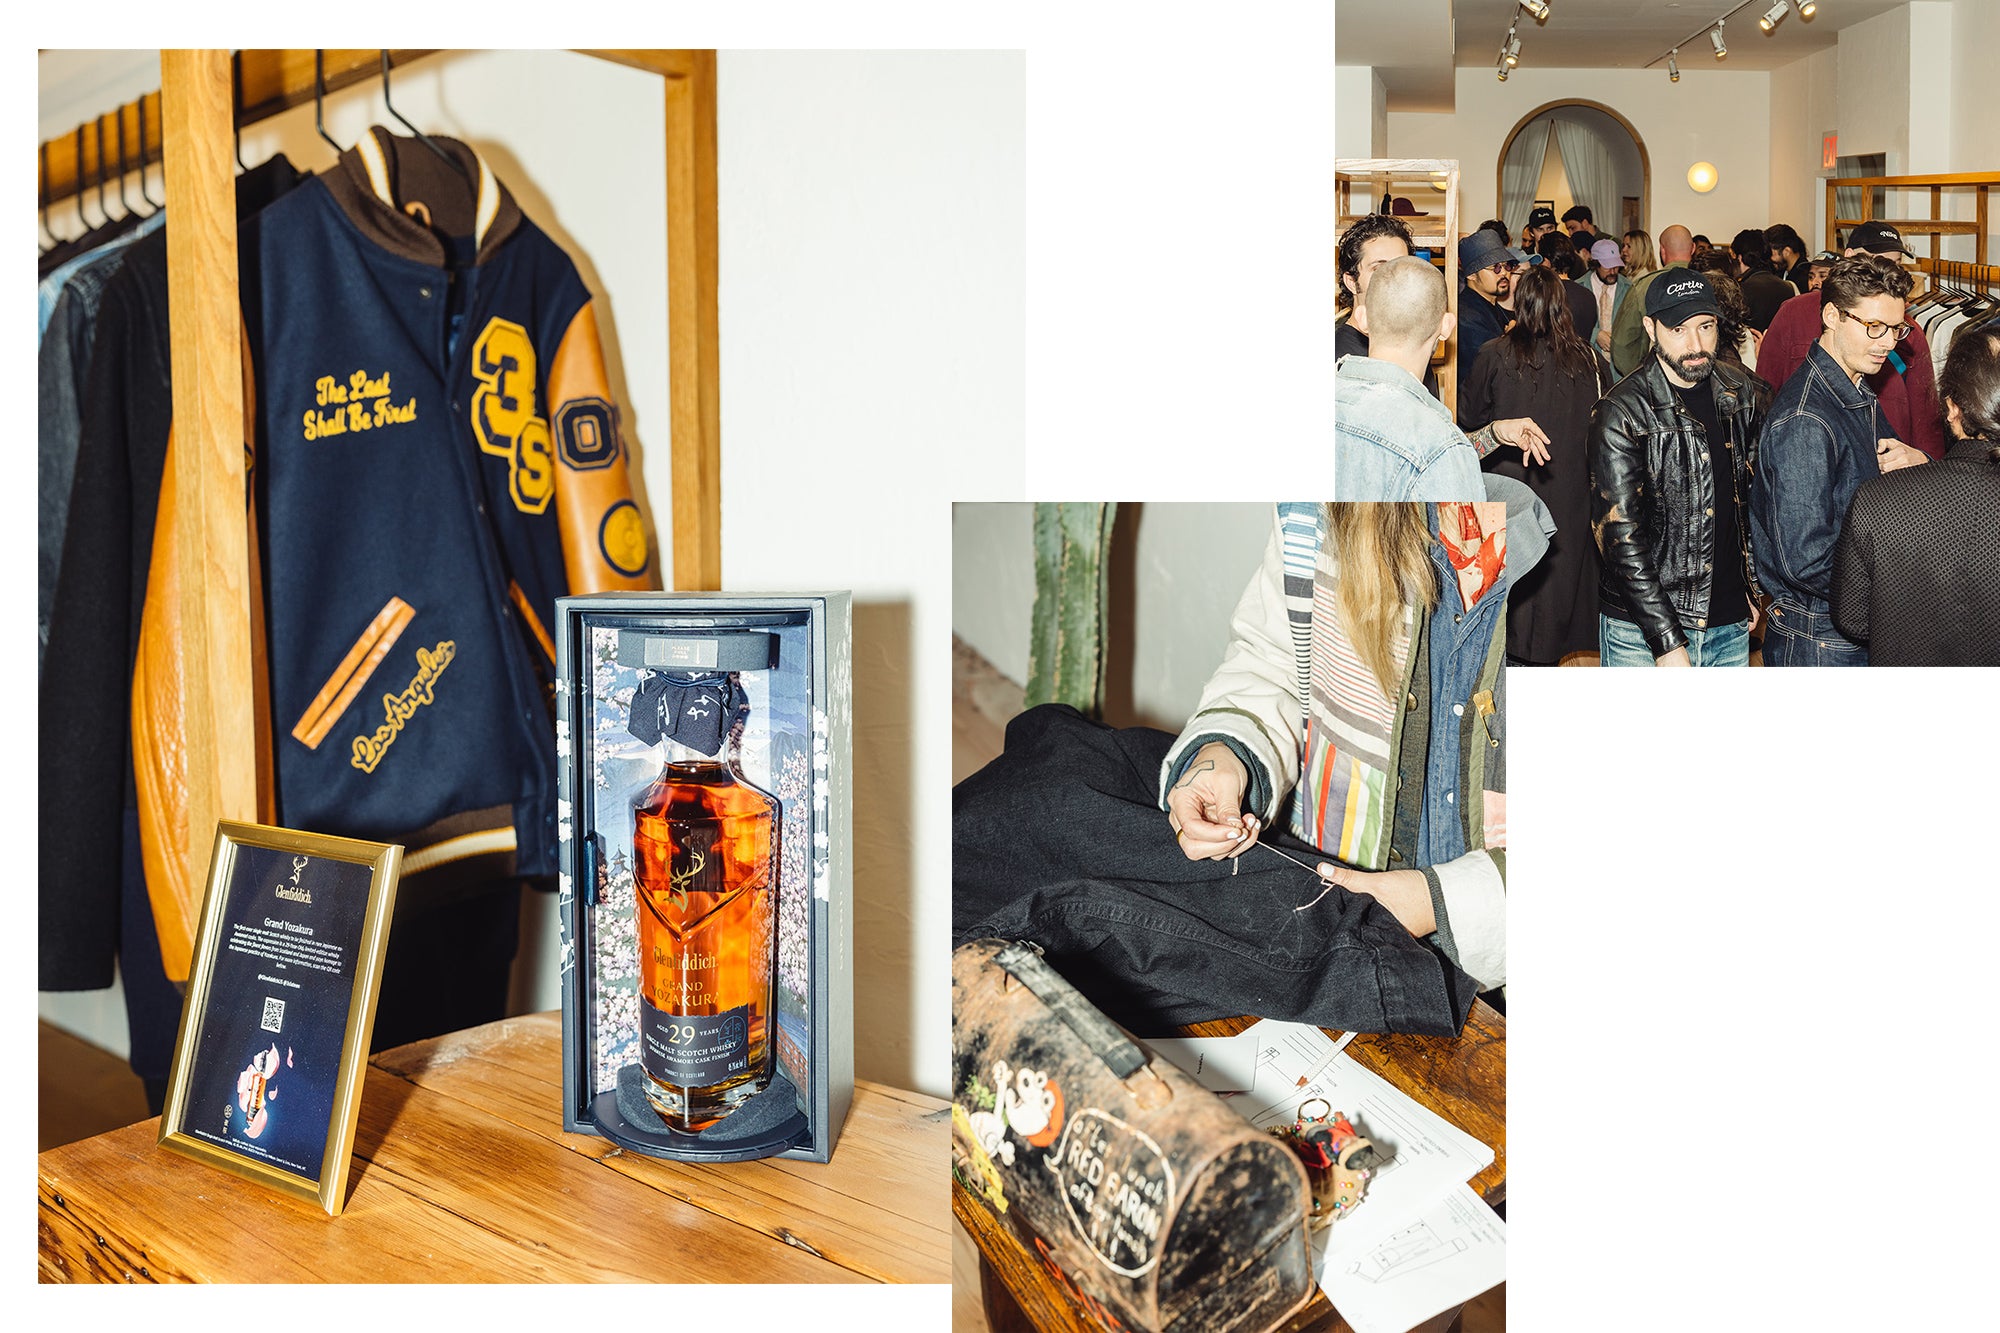 A triptych of whisky bottles and party attendees